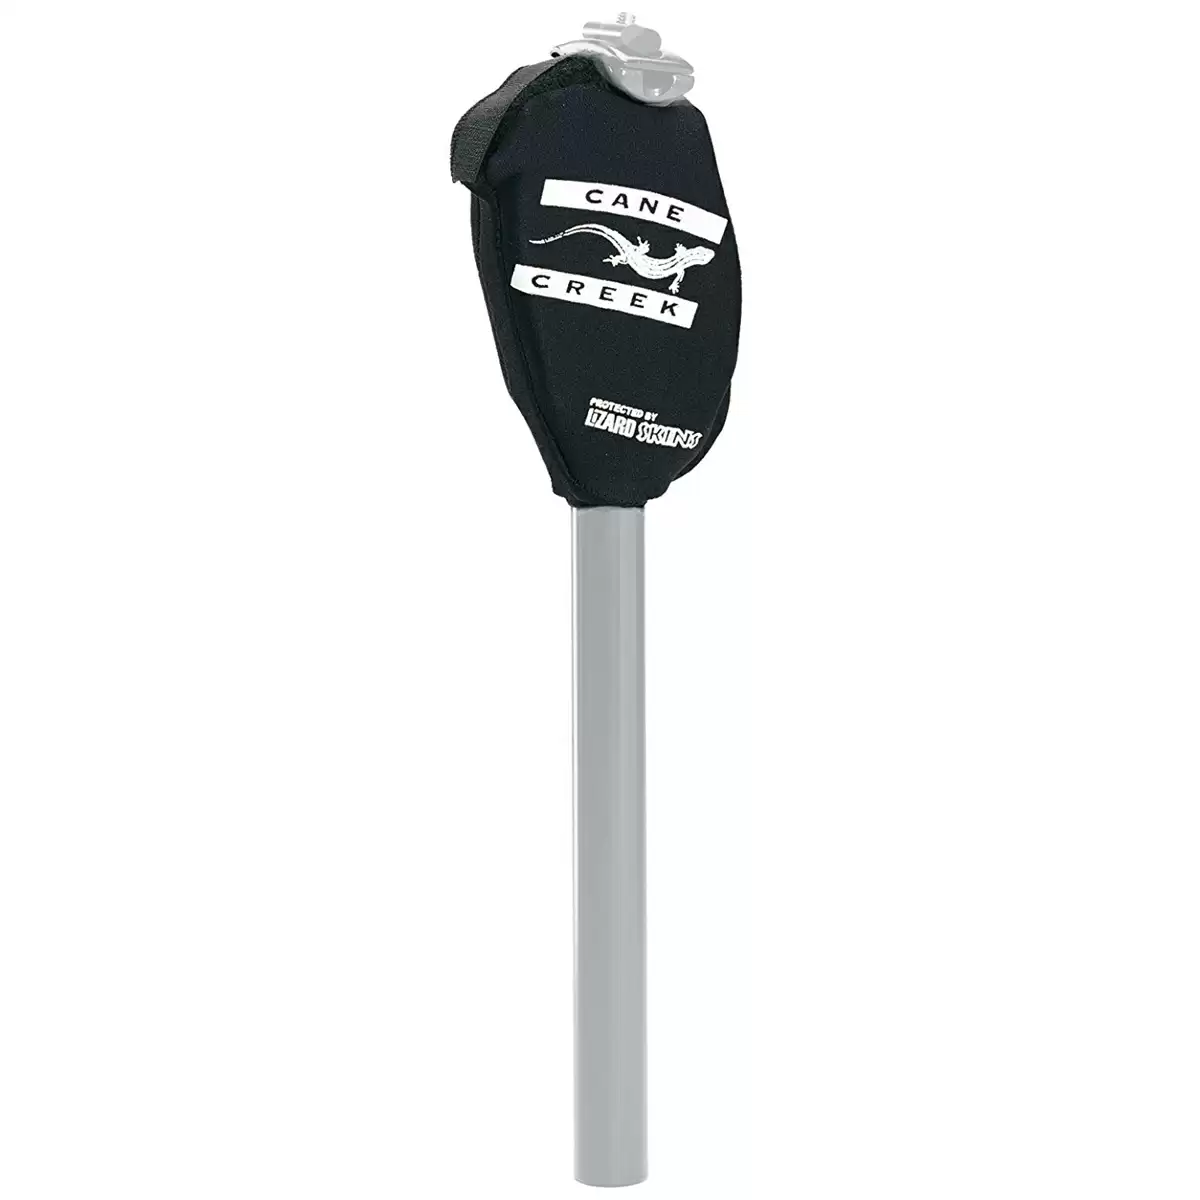 ThudGlove neoprene protection for 3G ST seatpost - image